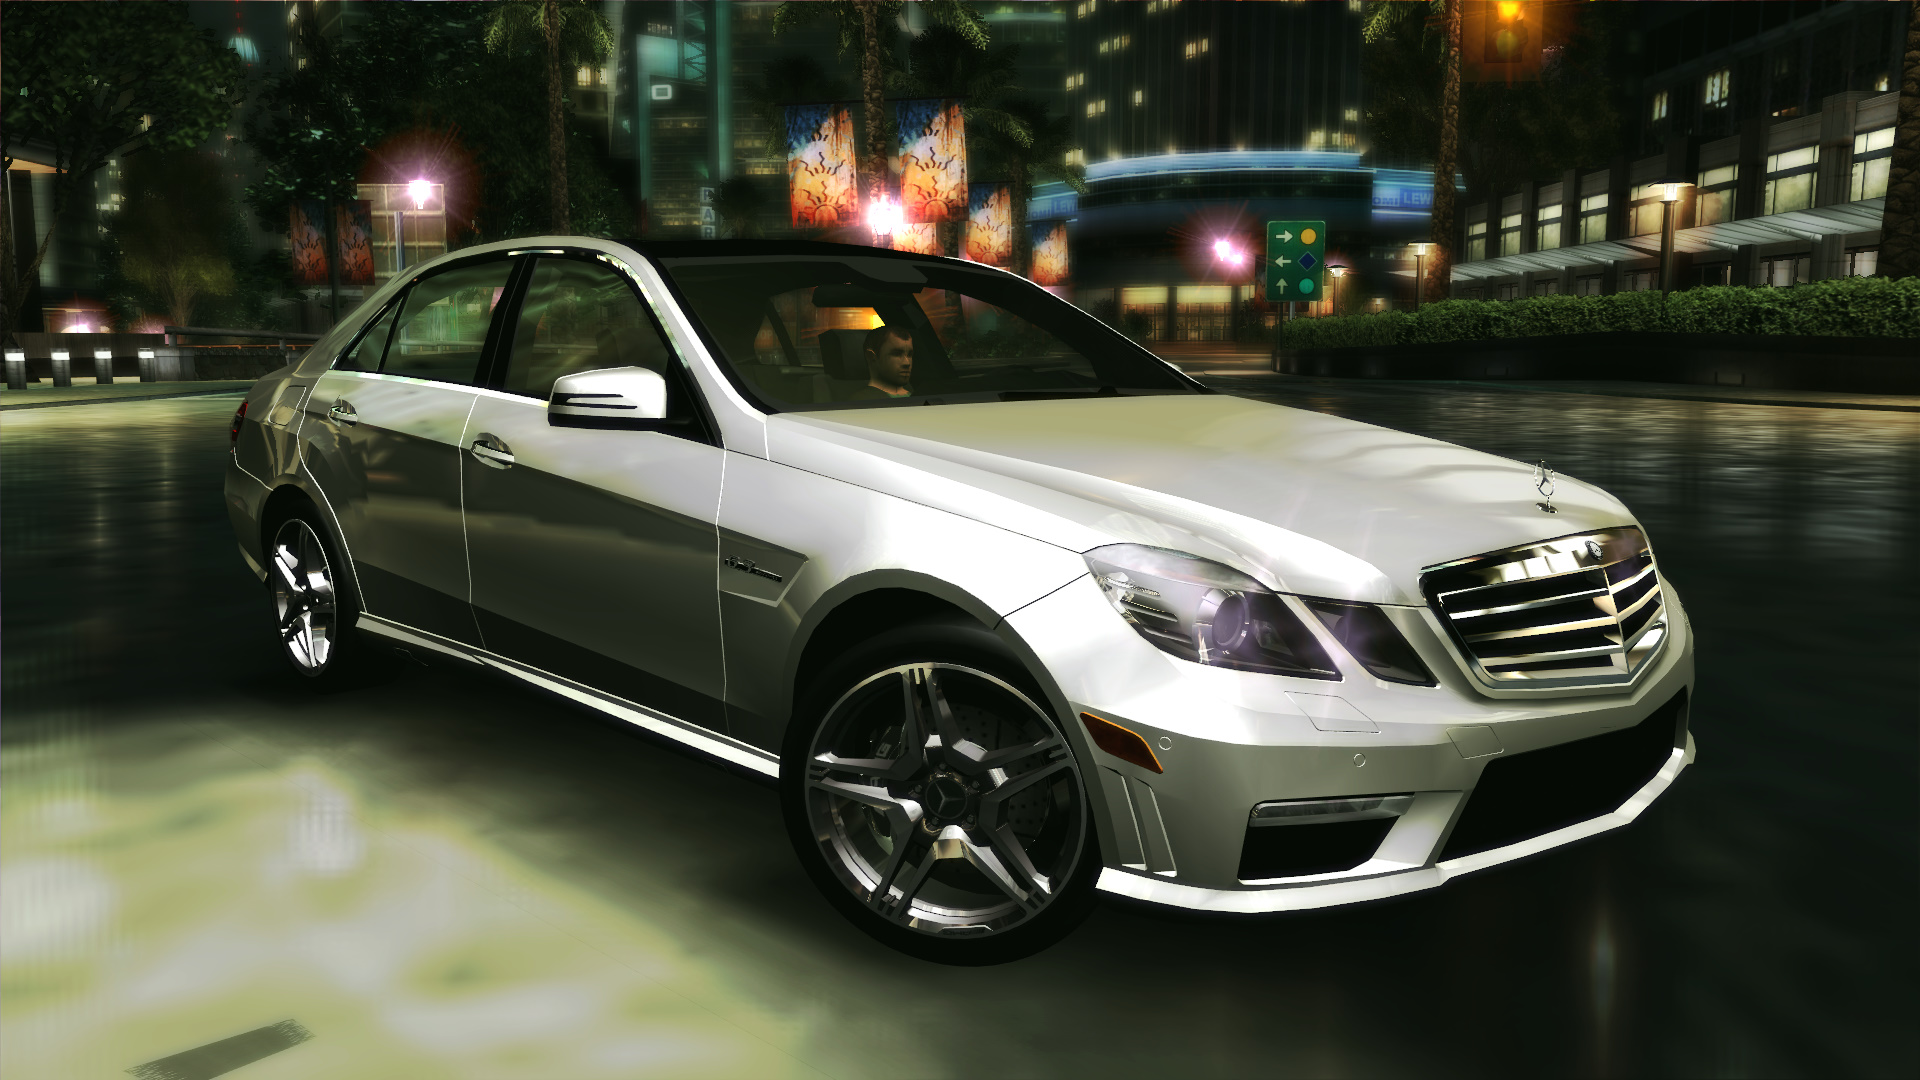 Need For Speed Underground 2 Mercedes Benz E63 AMG (W212) (Add-on)